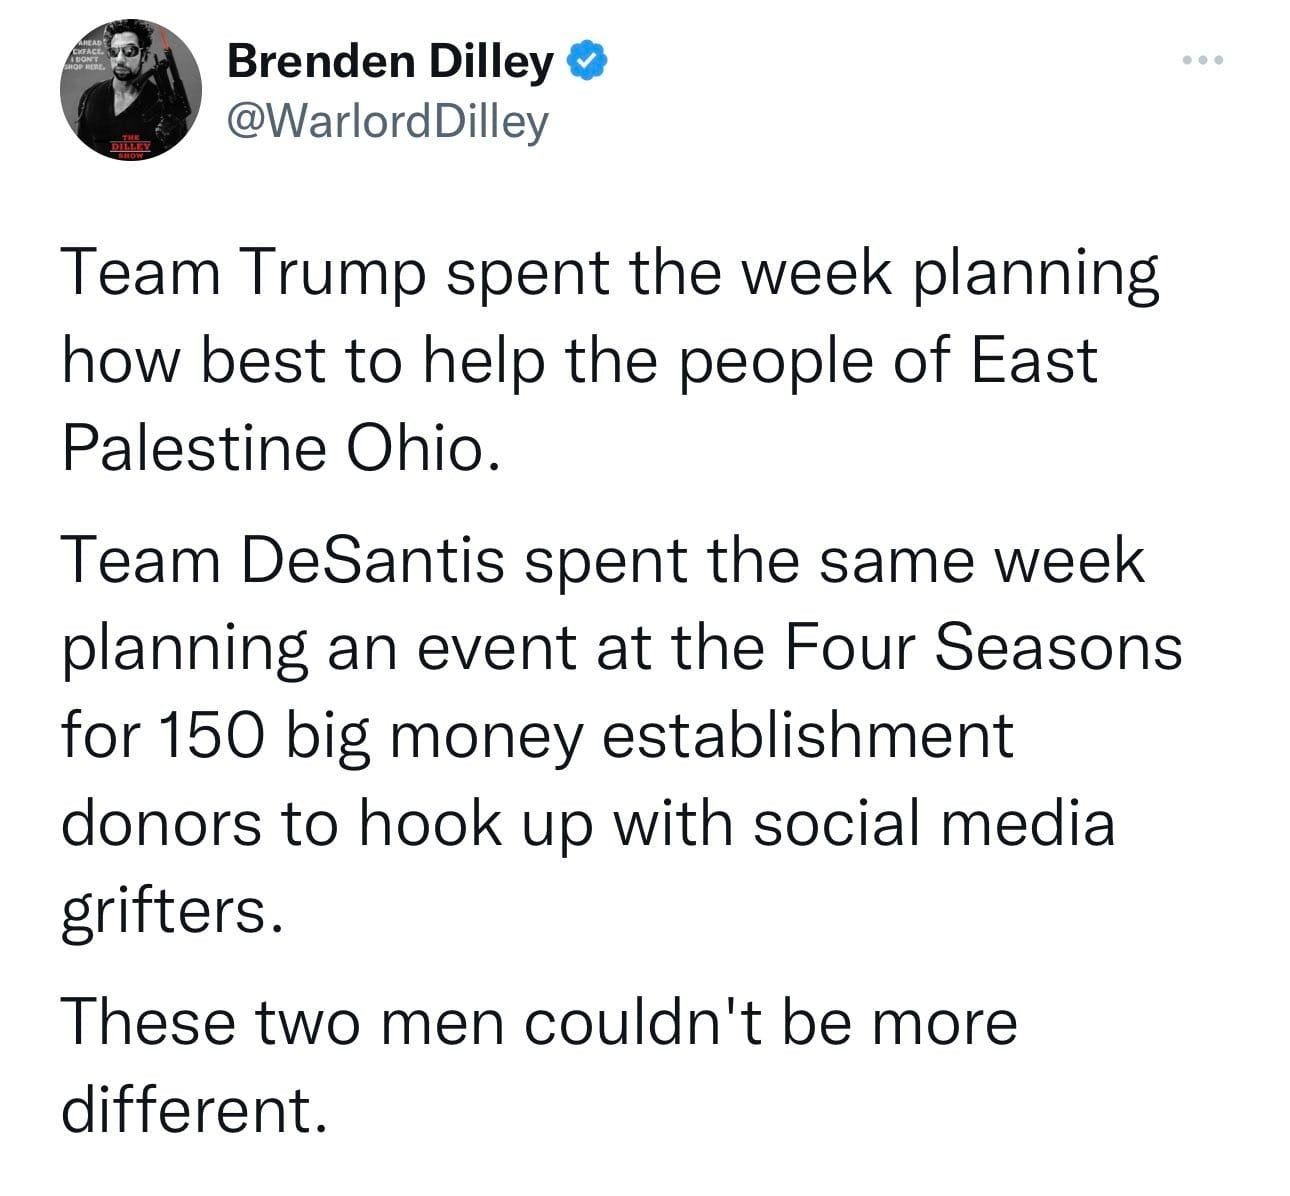 May be a Twitter screenshot of 1 person and text that says 'Brenden Dilley @WarlordDilley Team Trump spent the week planning how best to help the people of East Palestine Ohio. Team DeSantis spent the same same week planning an event at the Four Seasons for 150 big money establishment donors to hook up with social media grifters. These two men couldn't be more different.'